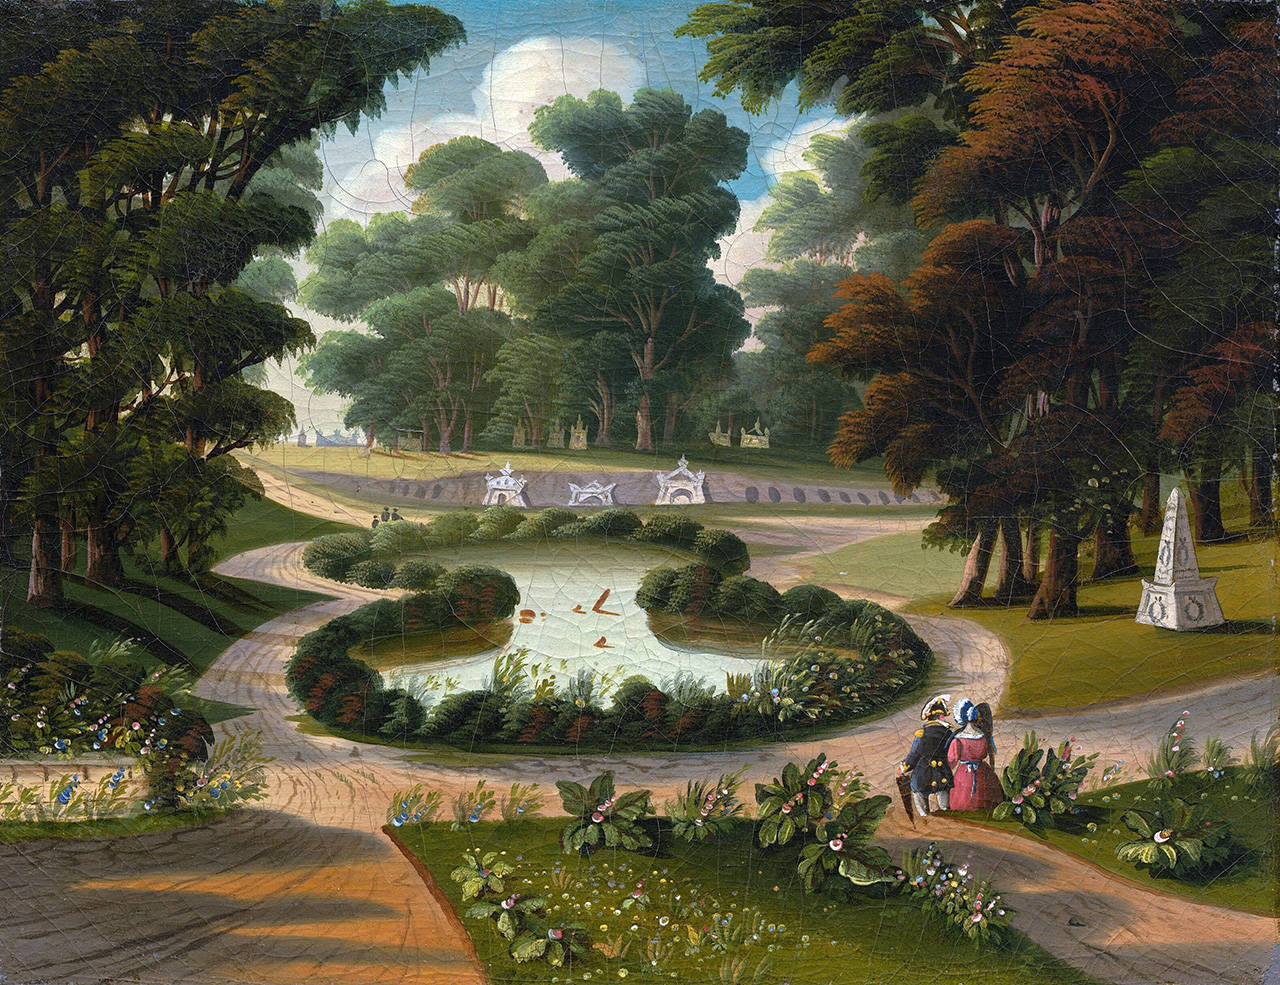 Courtesy National Gallery of Art                                This mid-19th century painting by Thomas Chambers depicts the Mount Auburn Cemetery, situated in Watertown and Cambridge, Massachusetts. It opened in 1832 on 72 acres of woodland to serve both as a burial place and an experimental garden.